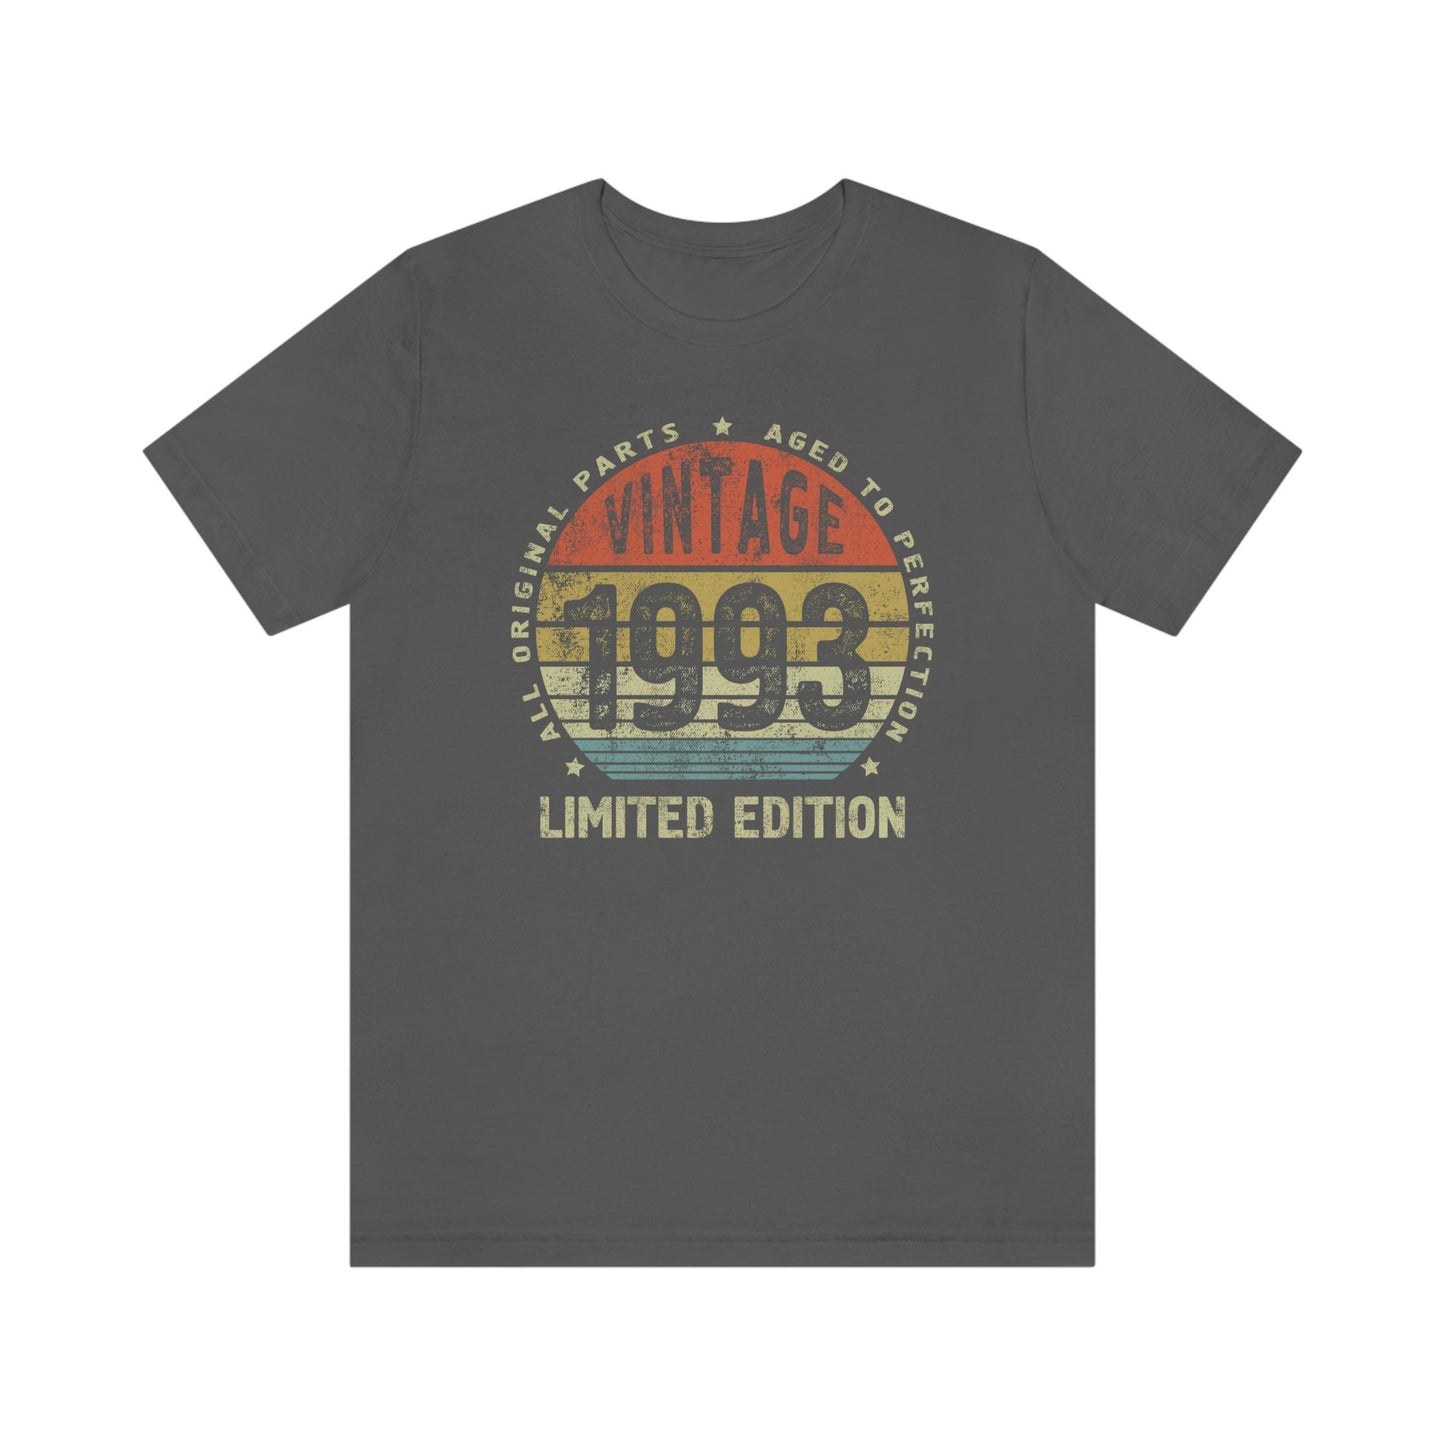 Vintage 1993 birthday gift t-shirt for women or men, shirt for sister or brother